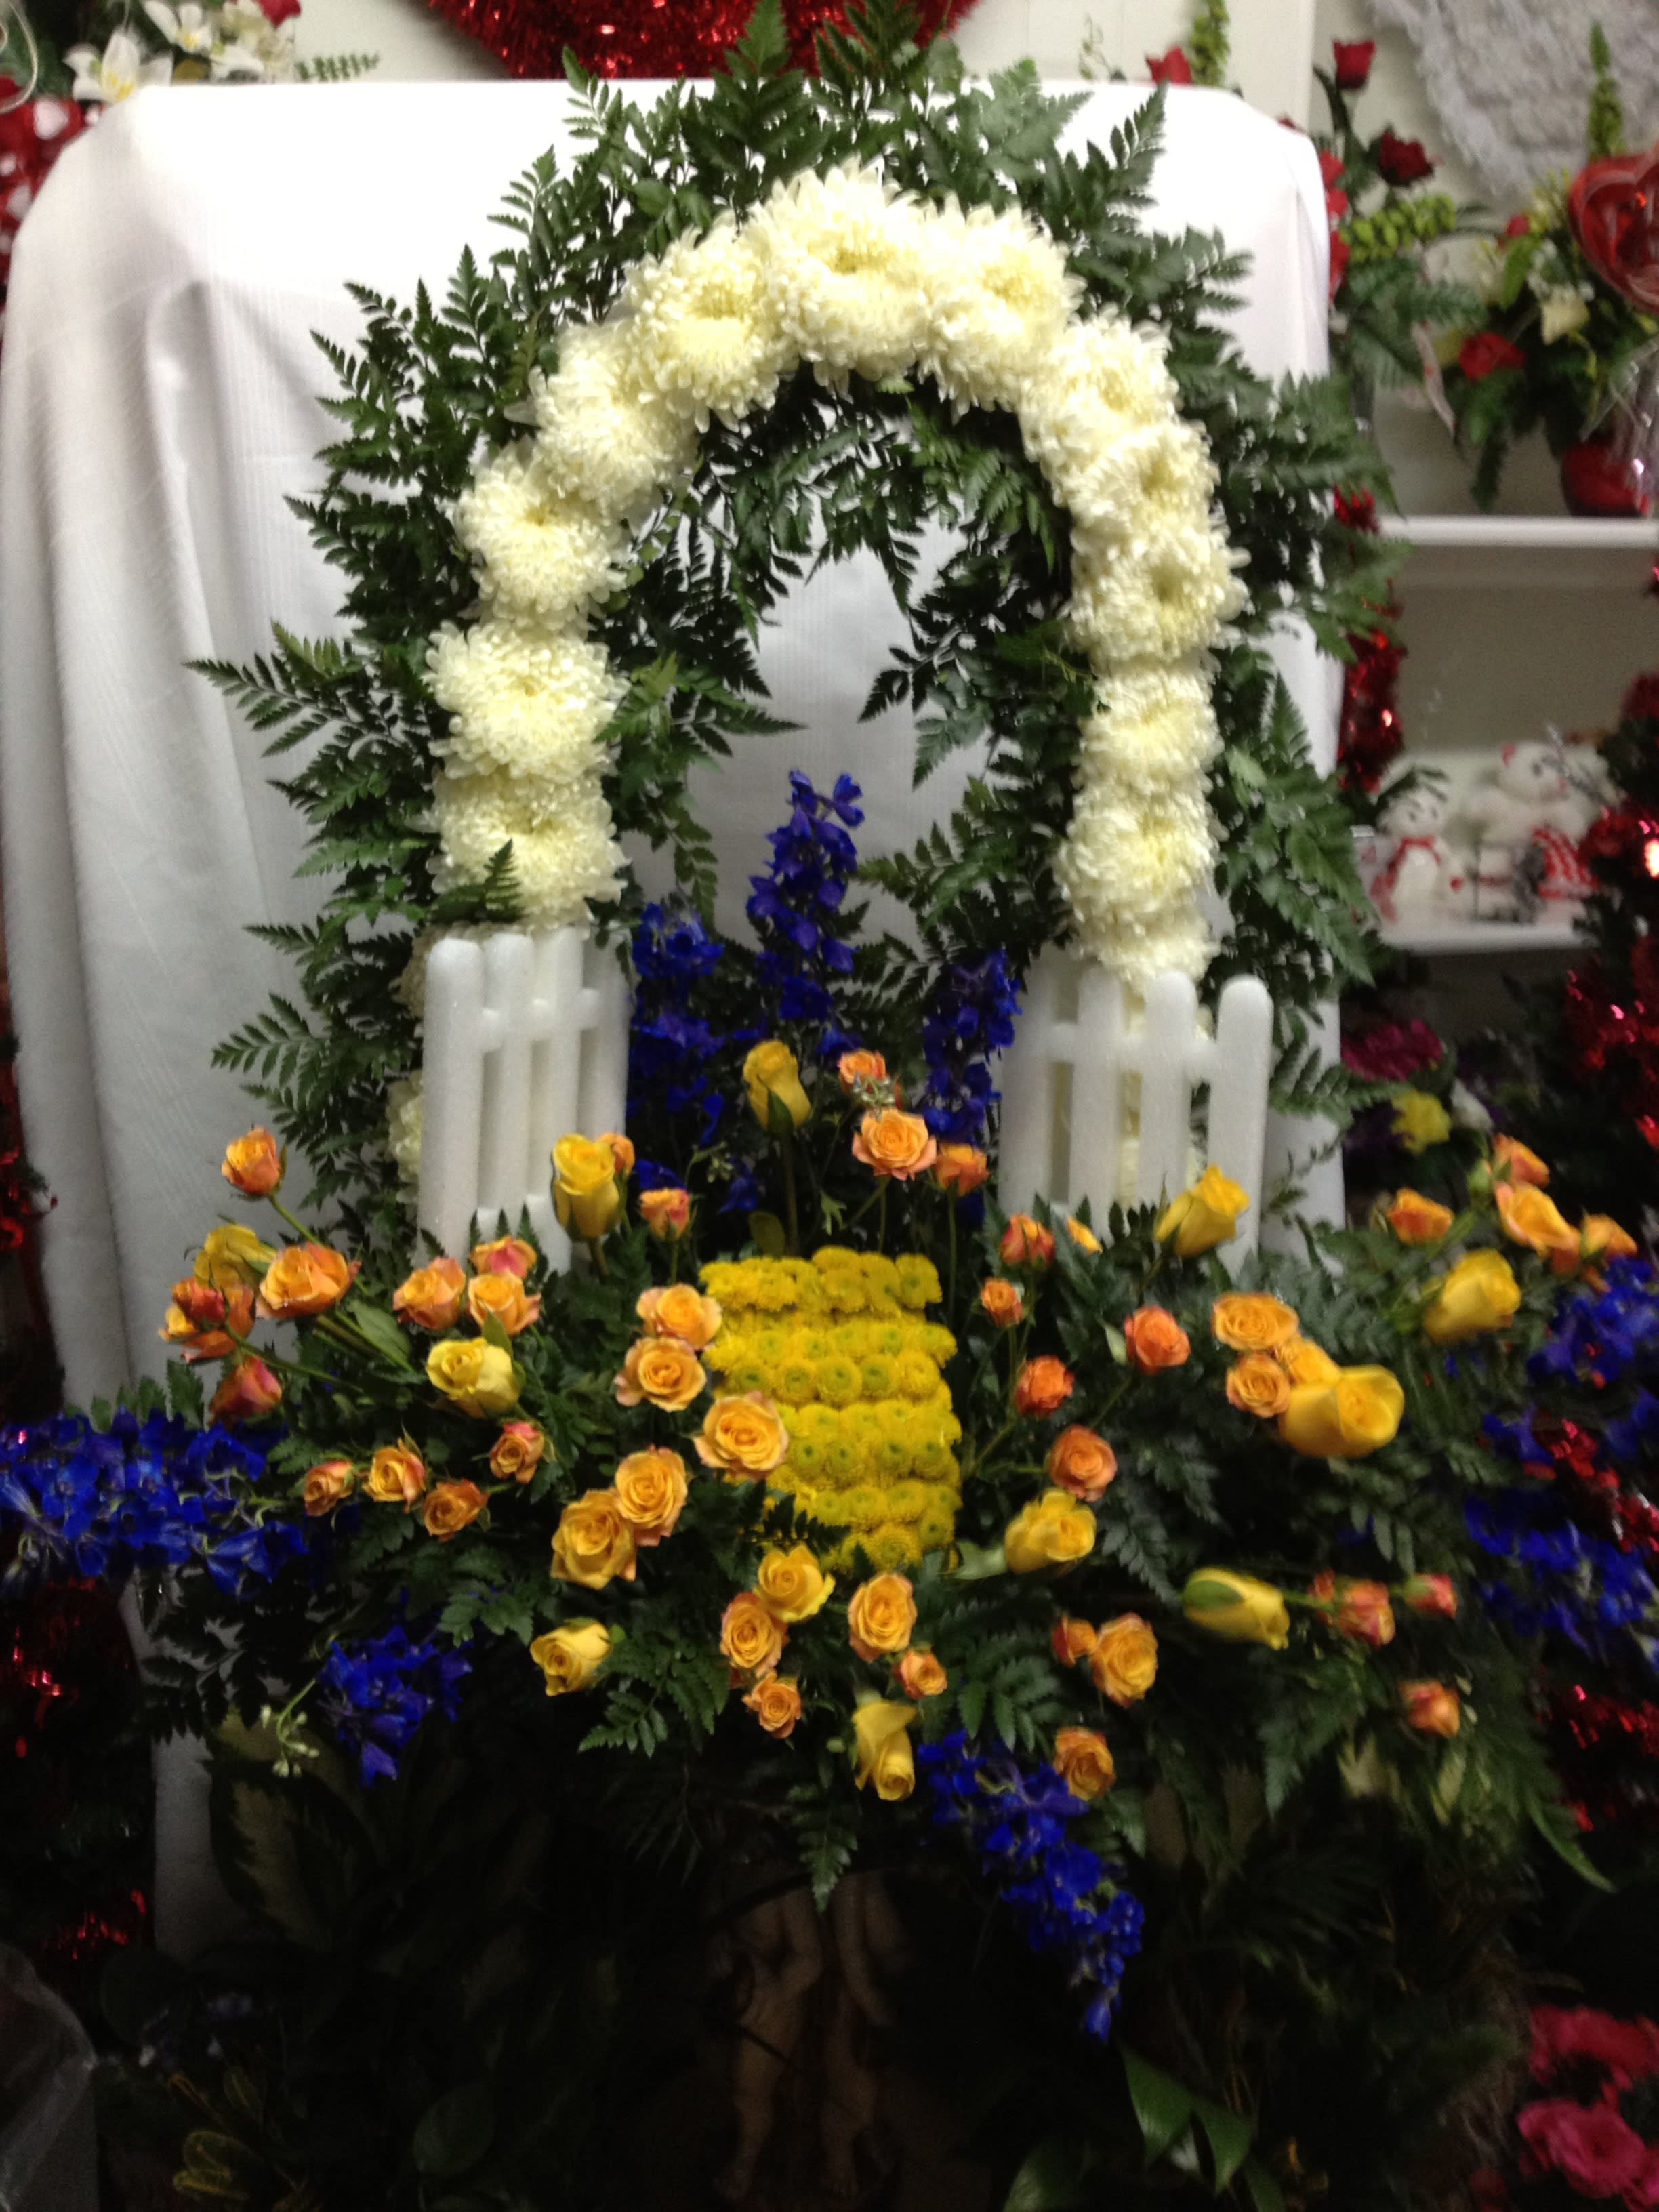 Heaven's Open Gate - * Yellow Roses * Yellow and Orange Spray Roses * Yellow Buttons * White Mums * Blue Delphinium * Leather Leaf This magnificent floral tribute is the perfect way to express your heartfelt sympathy.